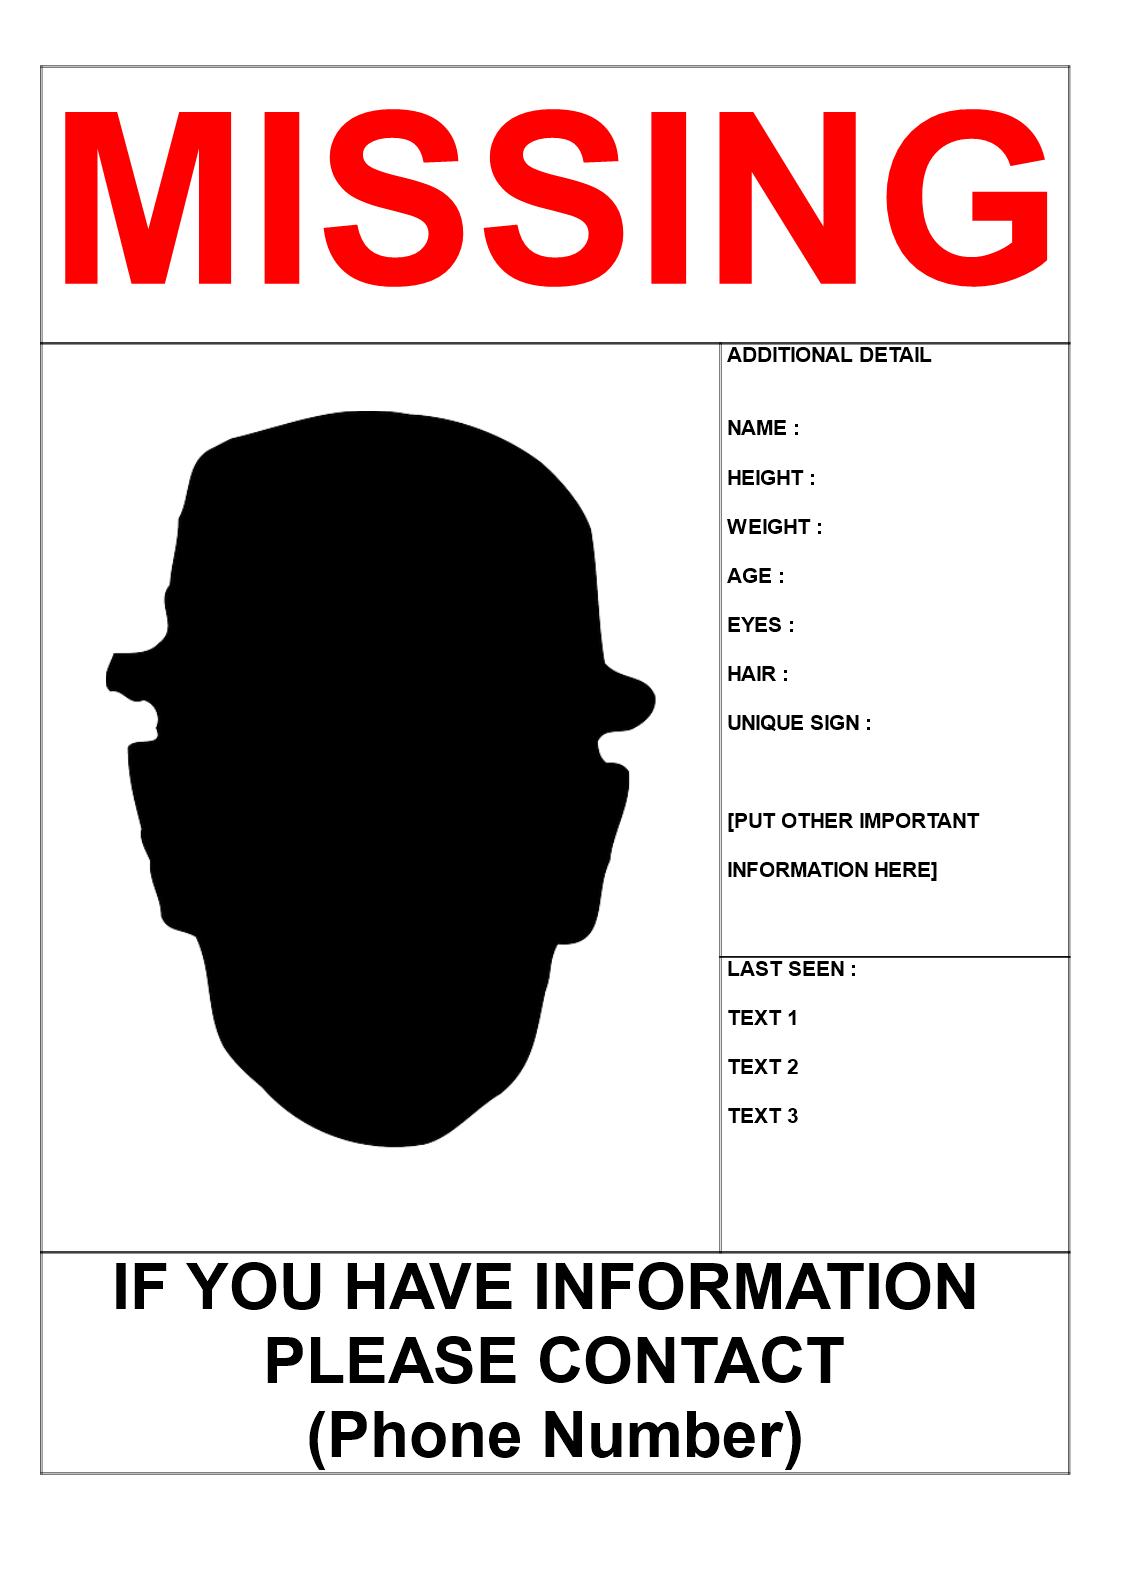 Missing Person Poster Template in A3 Size main image